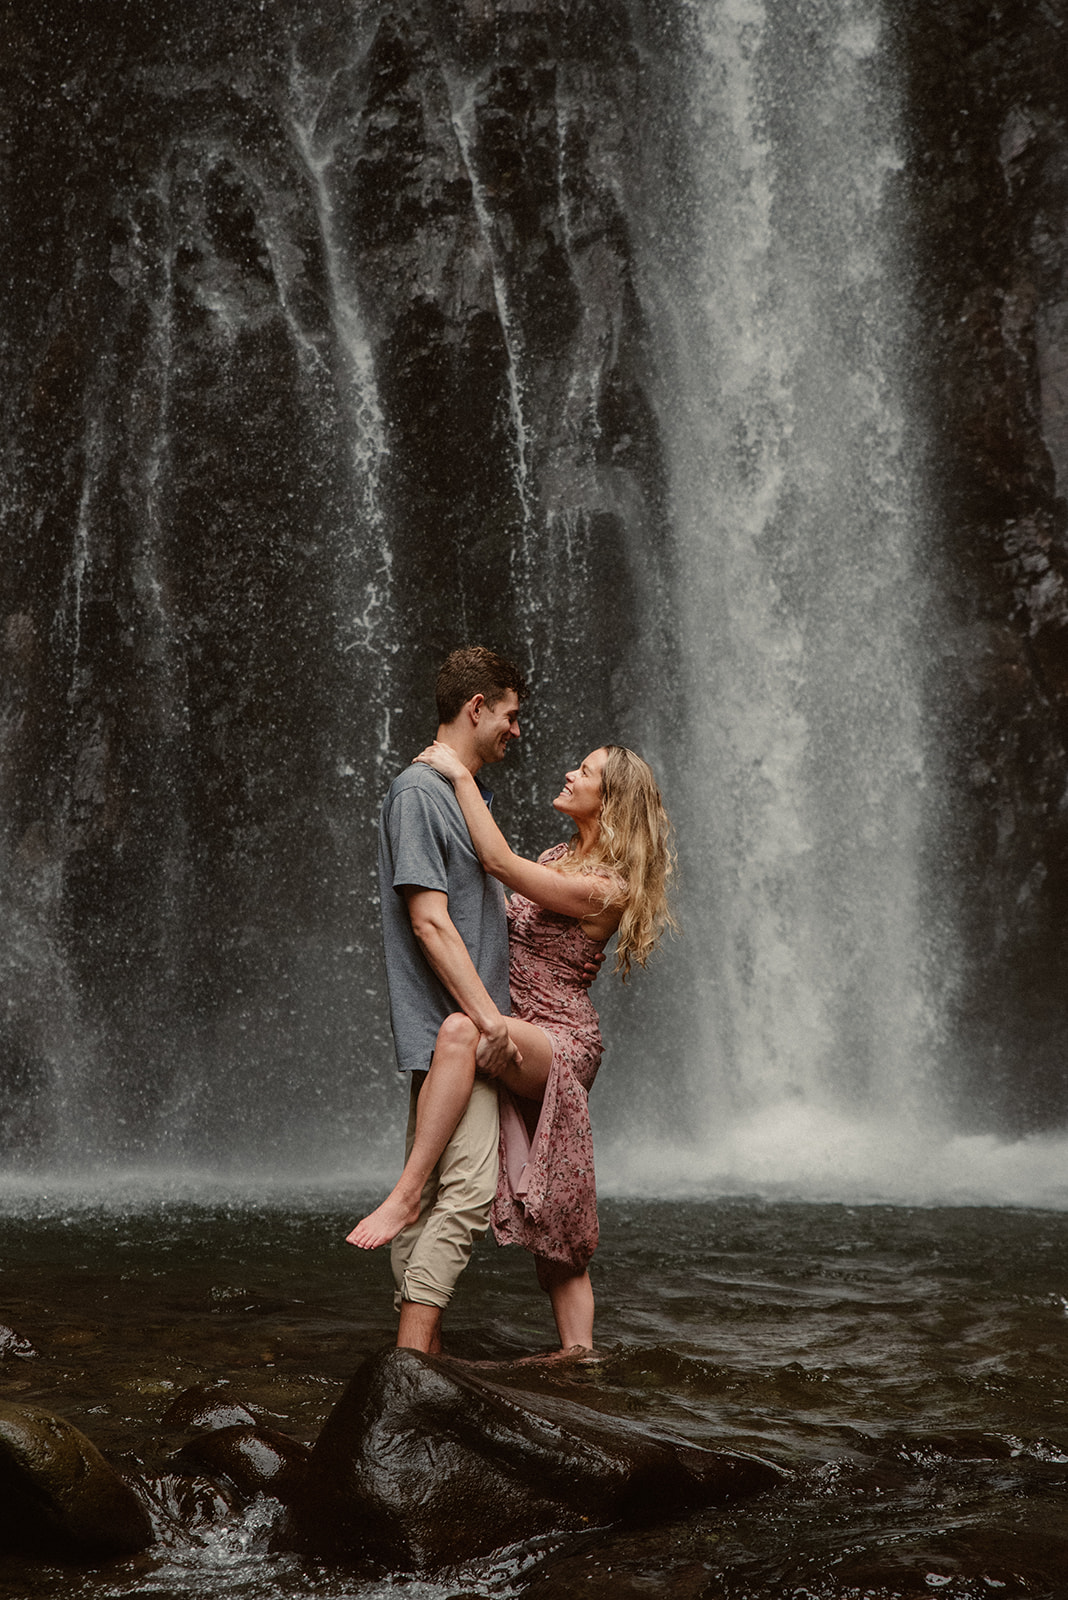 El Tigre Waterfall, Monteverde, Costa Rica, Couple and engagement session, Joice Dahianna wedding photography